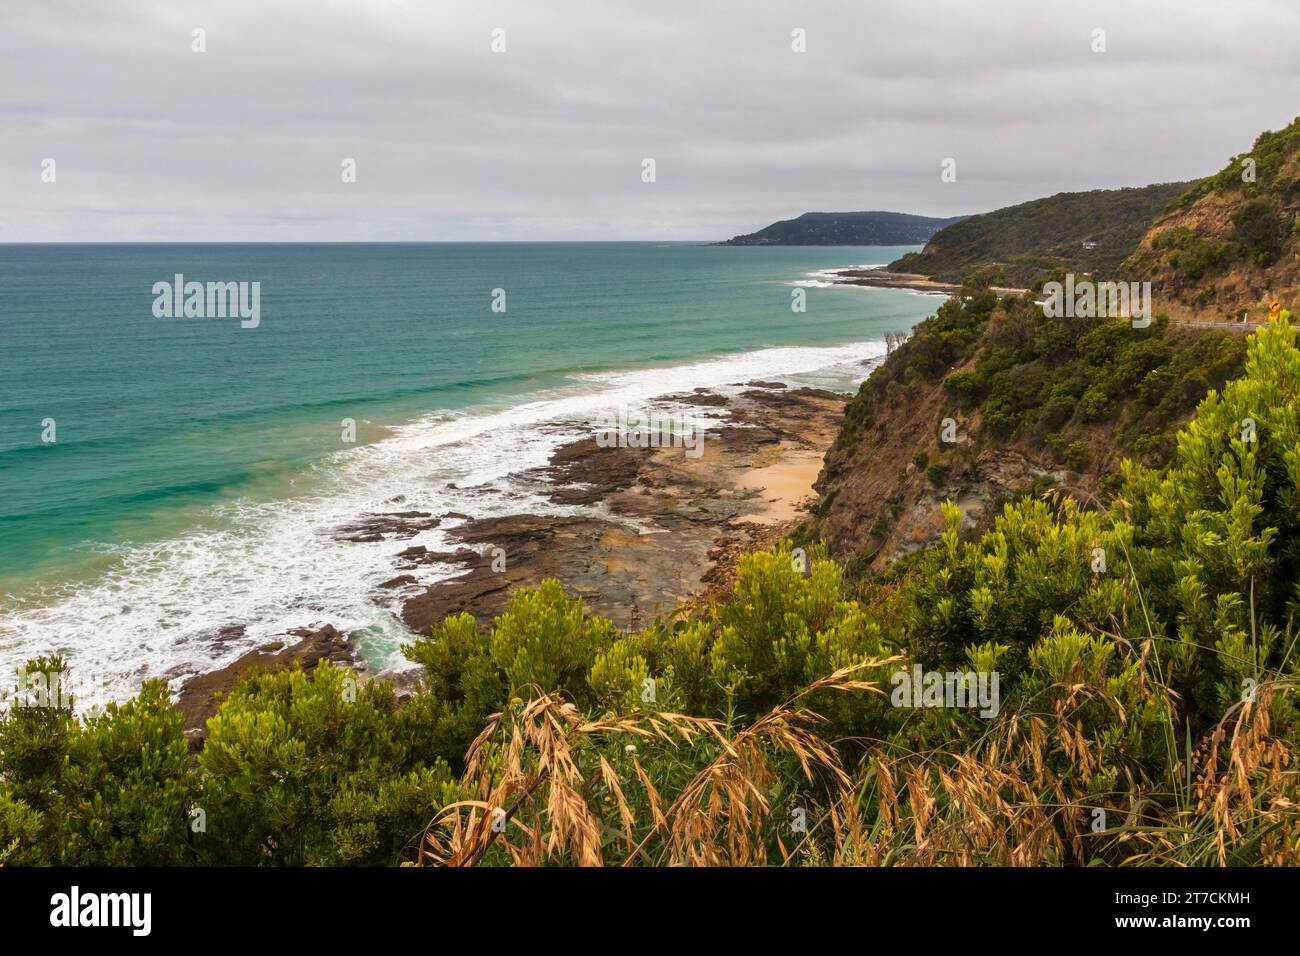 View from the Great Ocean Road overlooking waves crashing on a rocky shore in Victoria, Australia. Stock Photo